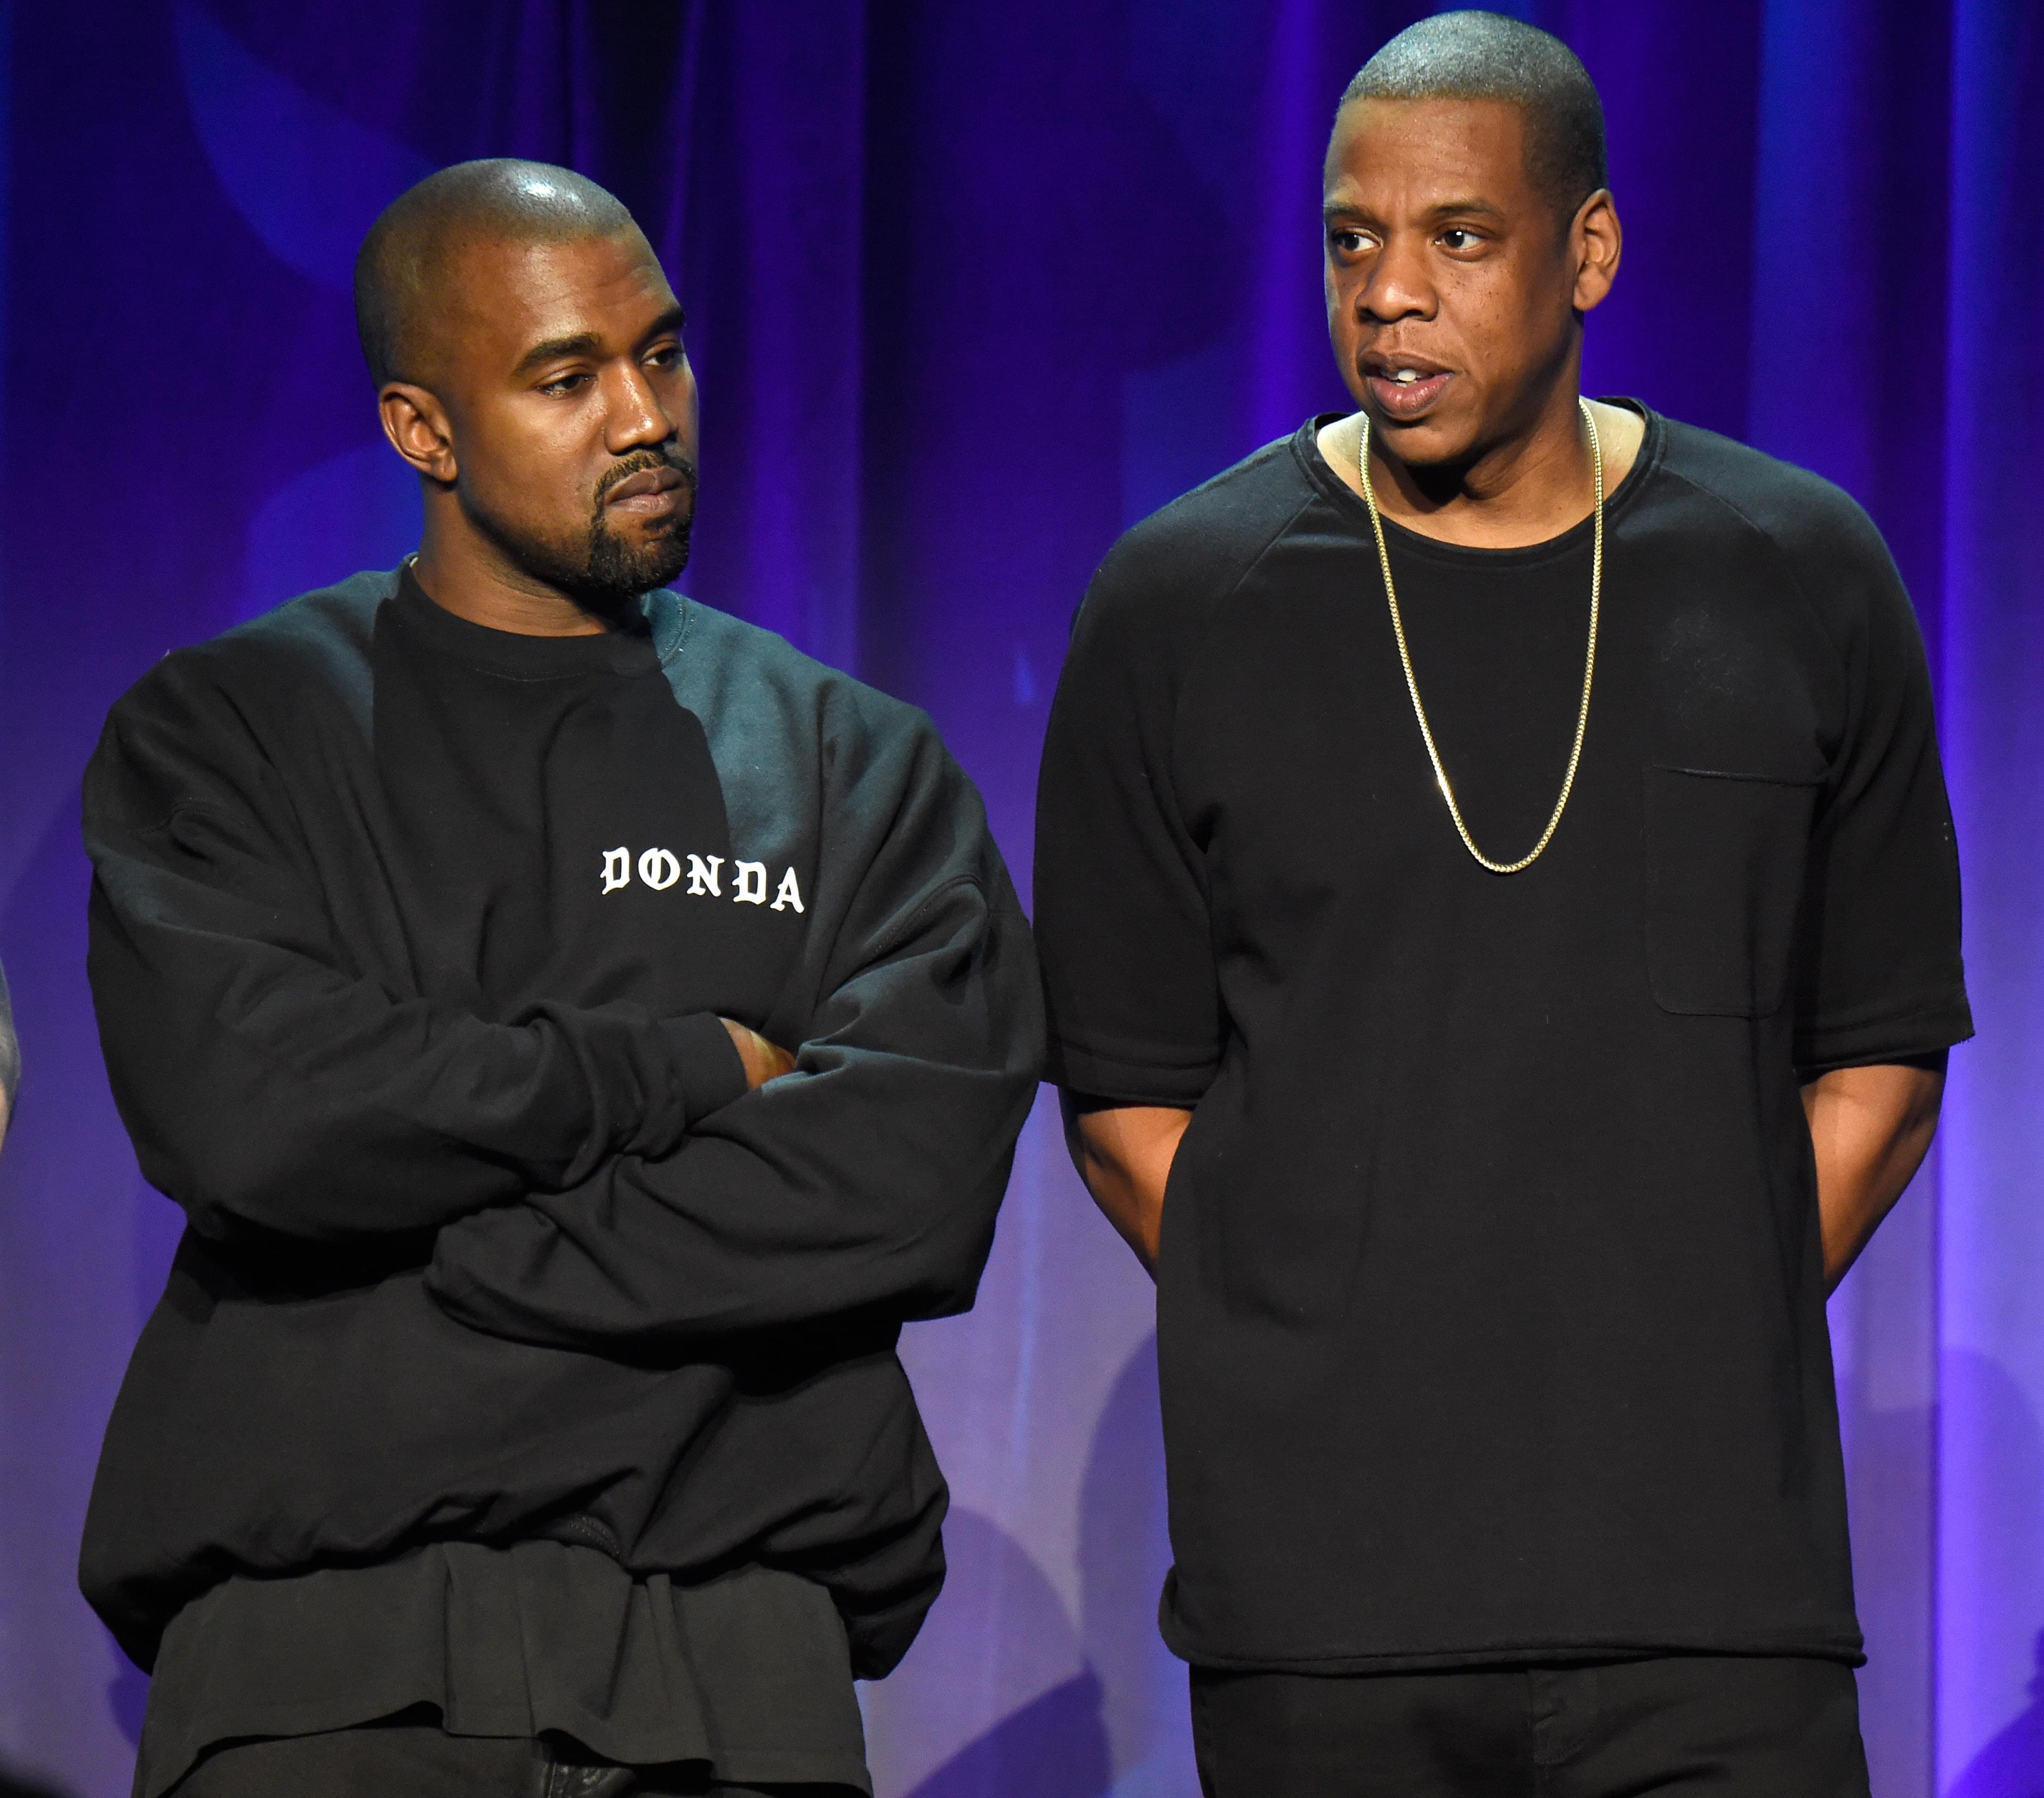 A Documentary Surrounding A Jay-Z & Kanye Beef Is Coming Soon…